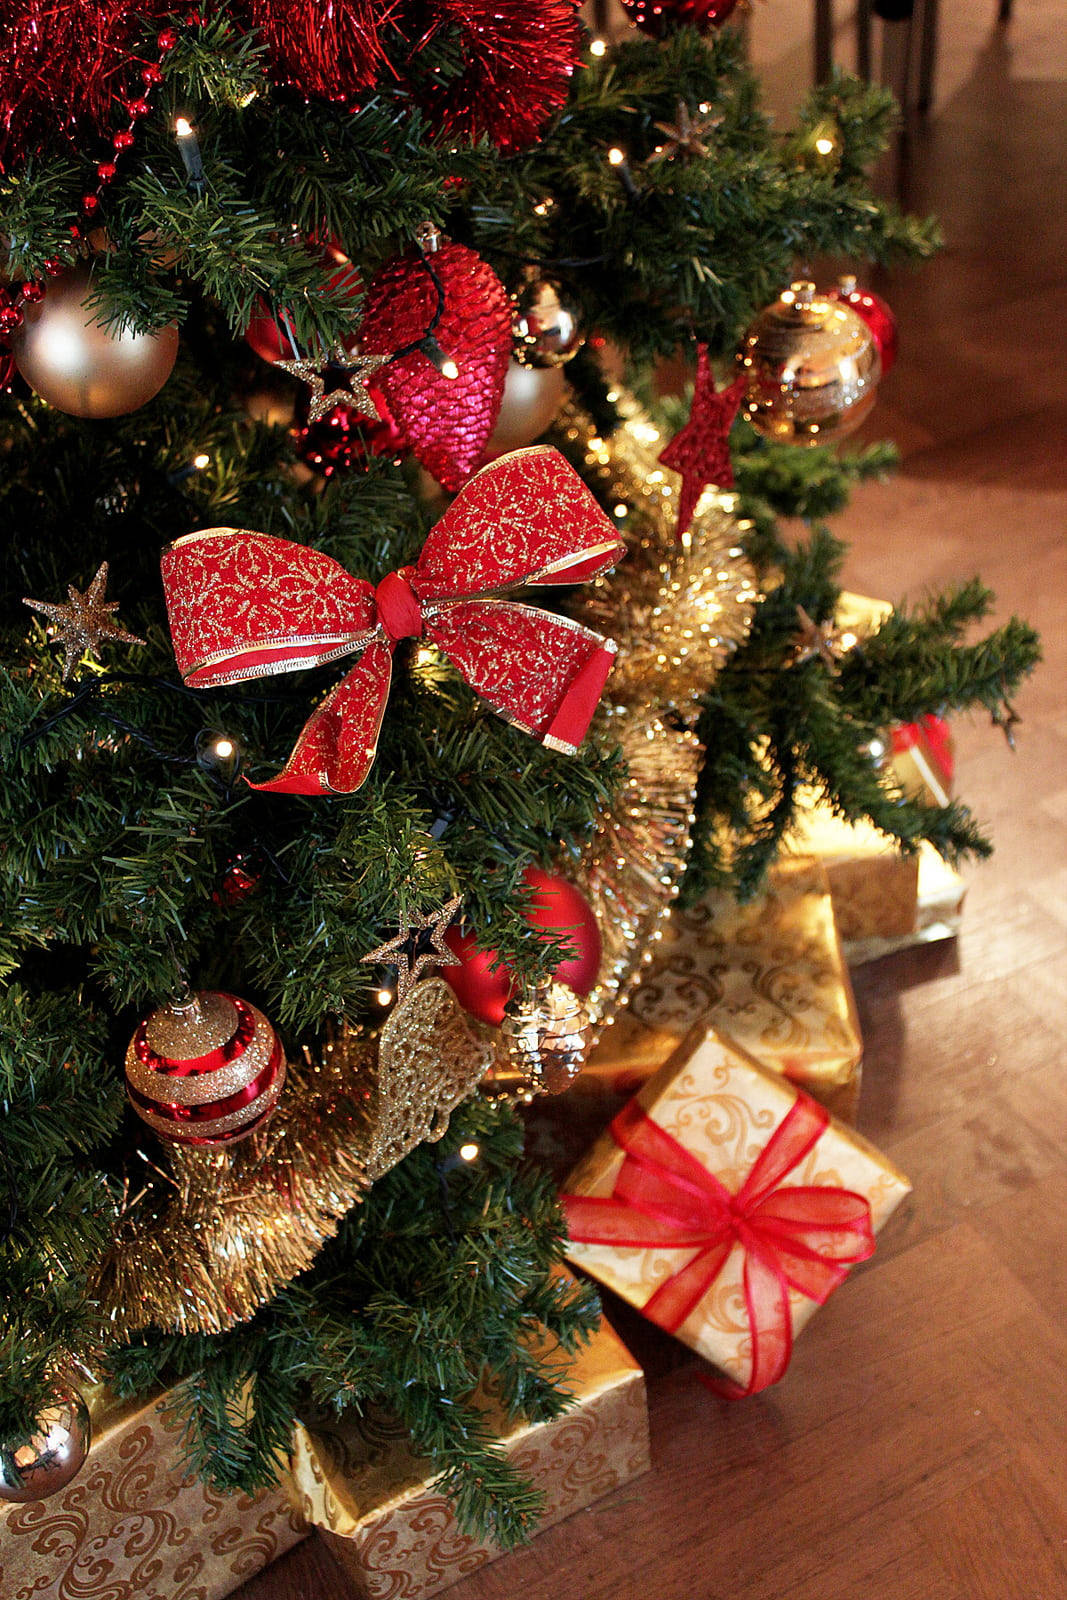 Beautiful Christmas Gifts Under The Tree Background